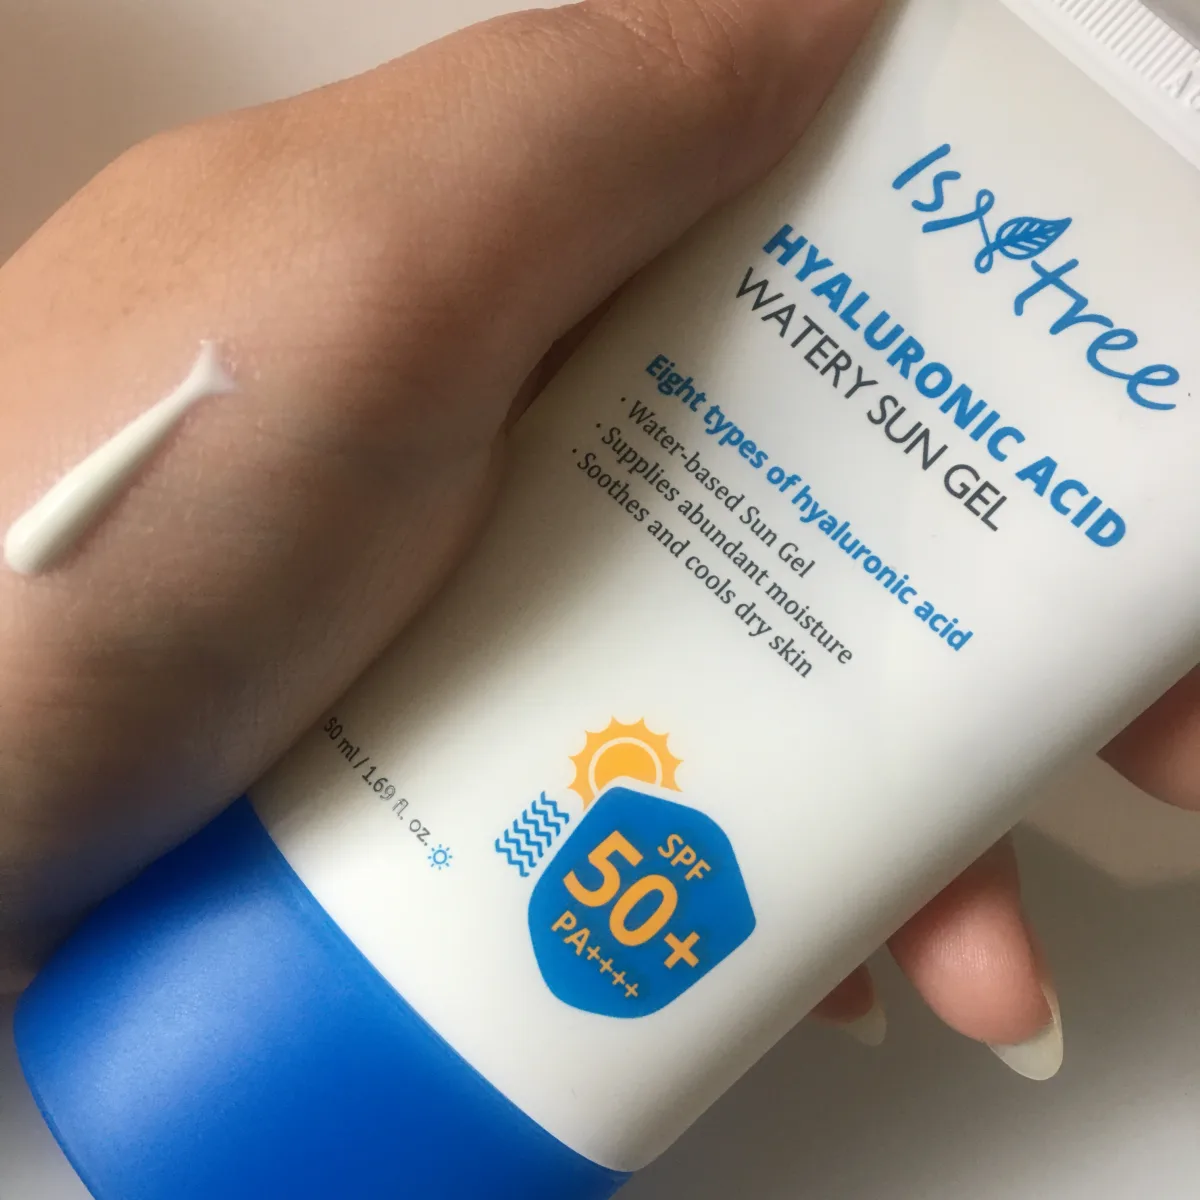 Isntree Hyaluronic Acid Watery Sun Gel SPF50+ PA++++ - - review image